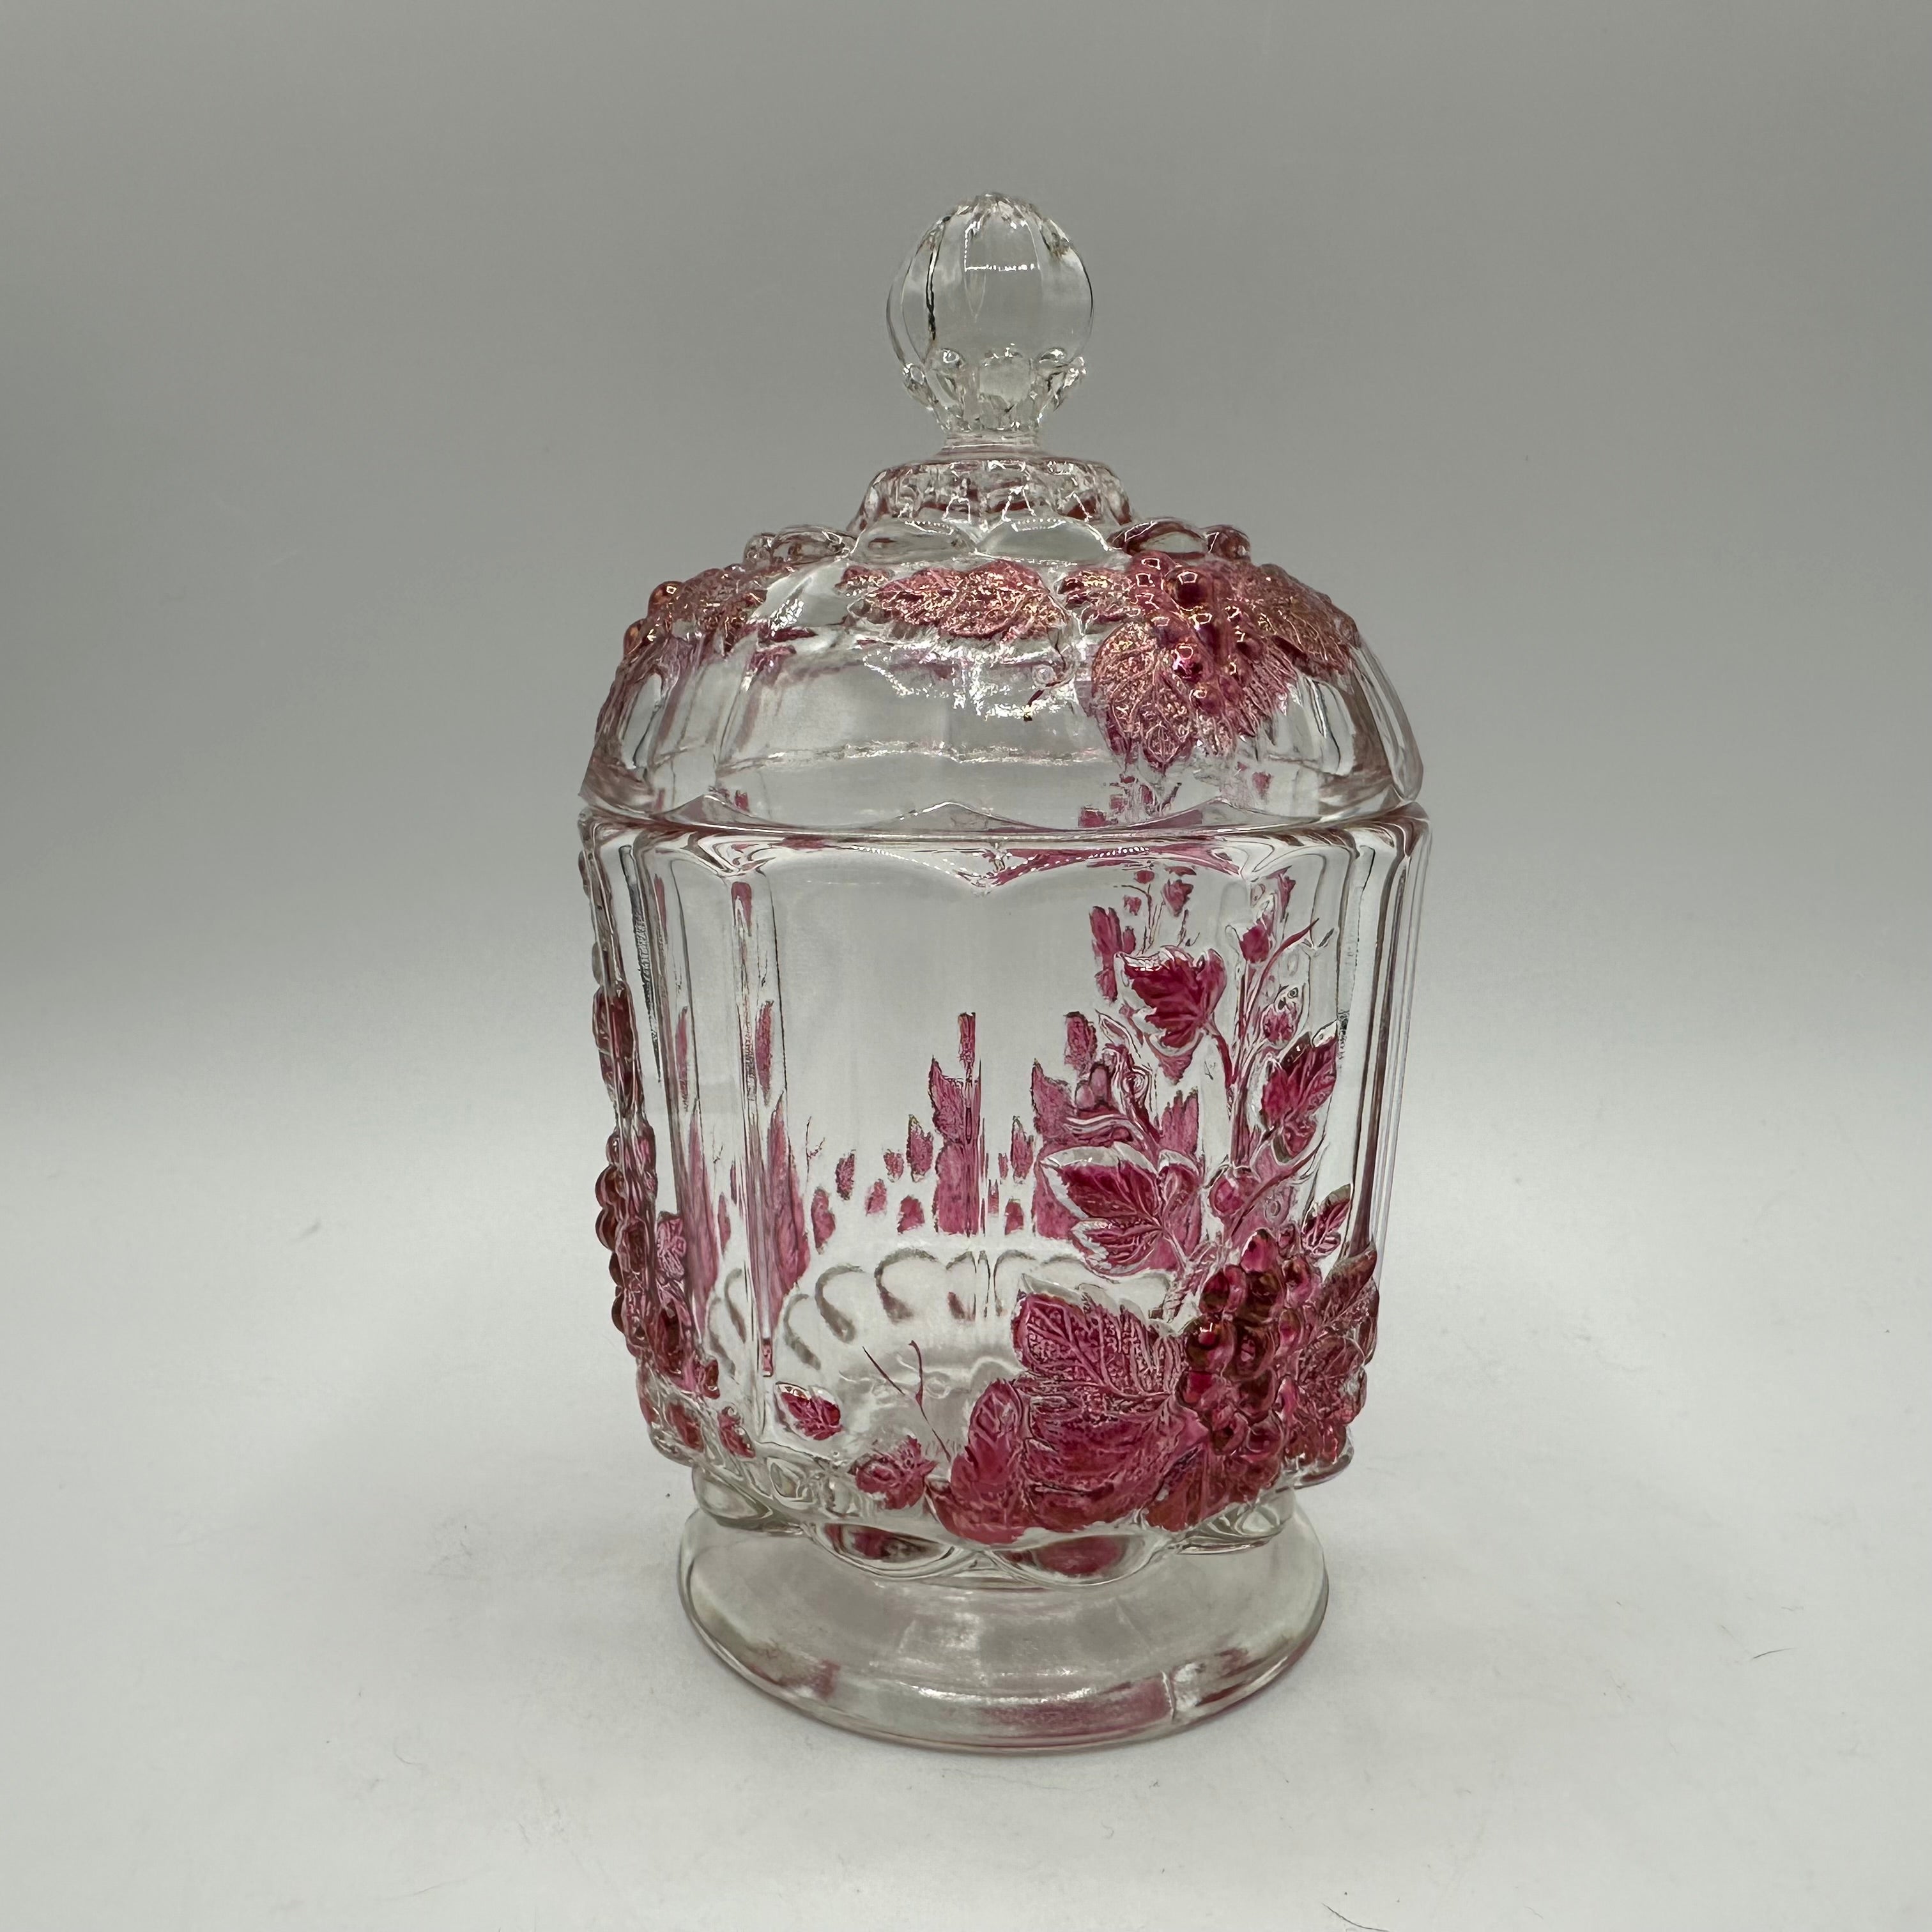 Westmoreland Lidded Candy Dish, Clear With a Red Flash Grape Design